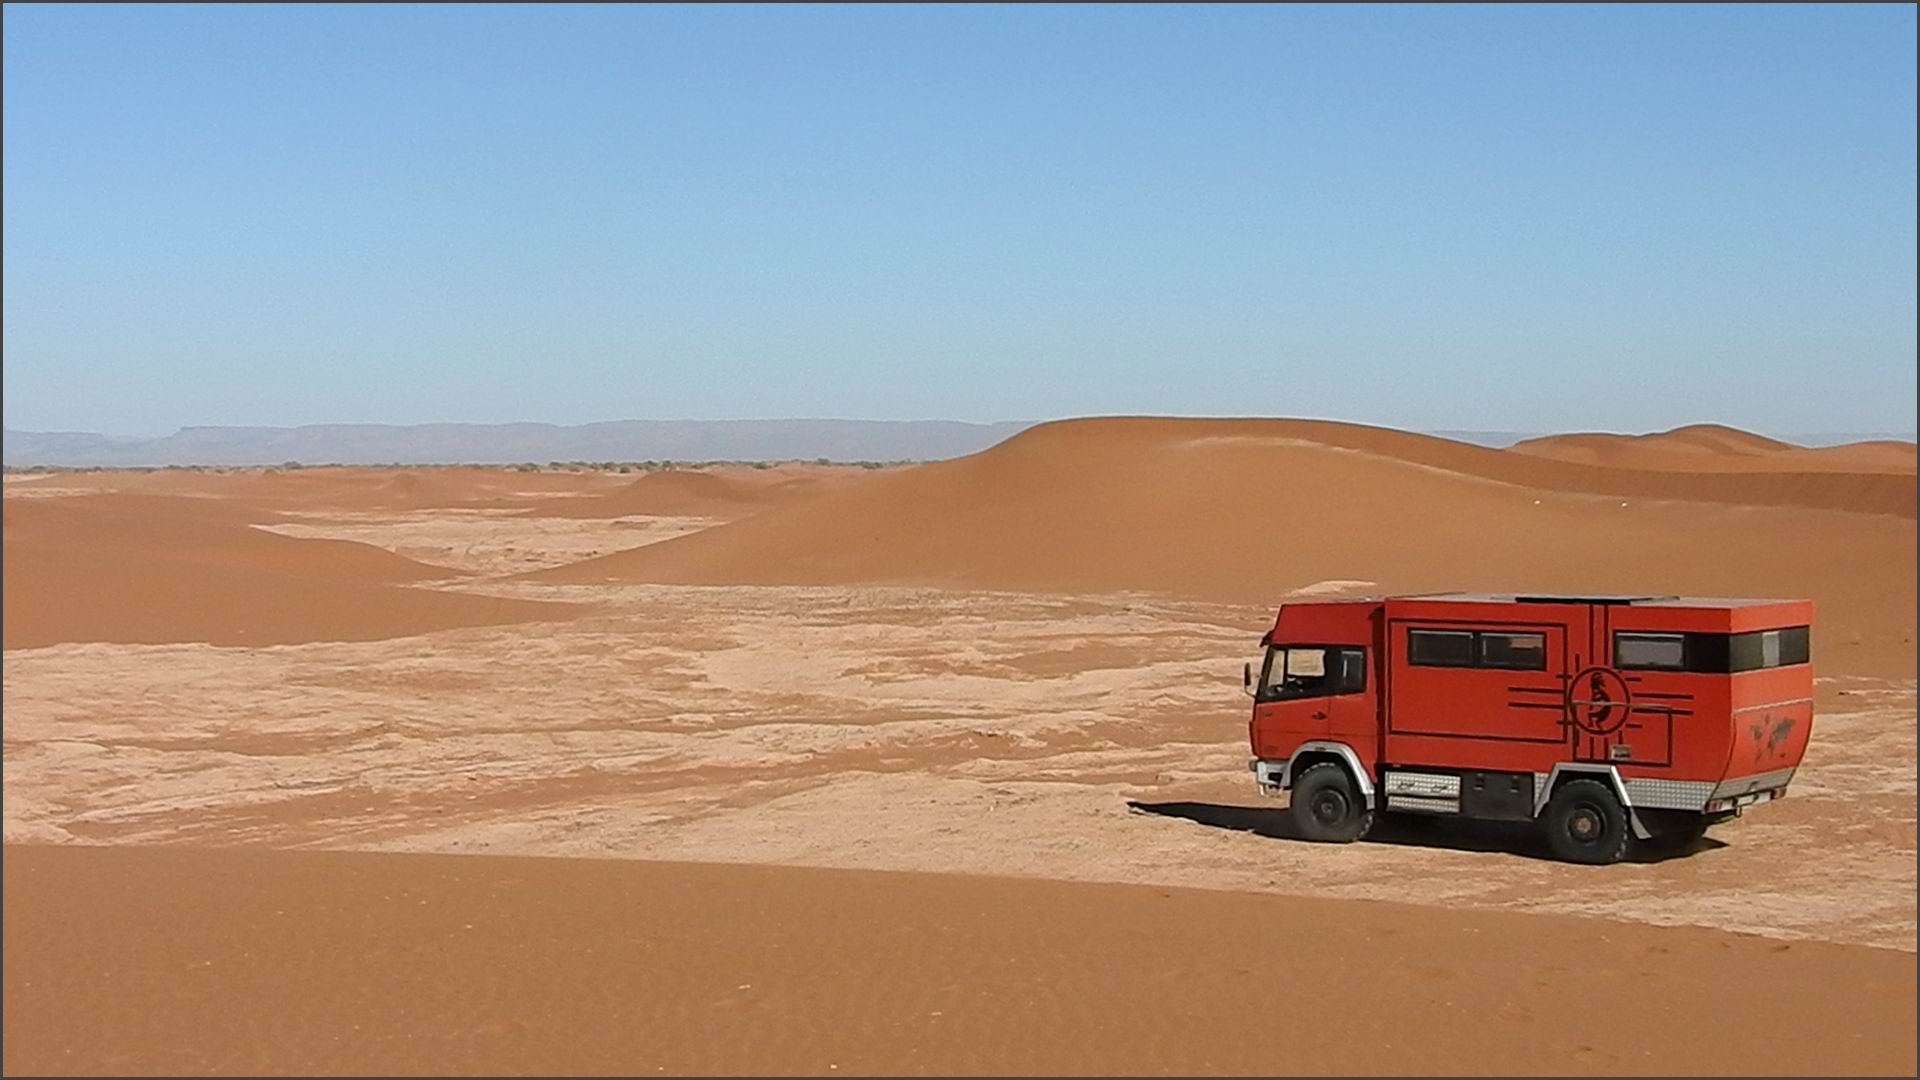 Agile Mercedes Family Expedition Truck in the desert